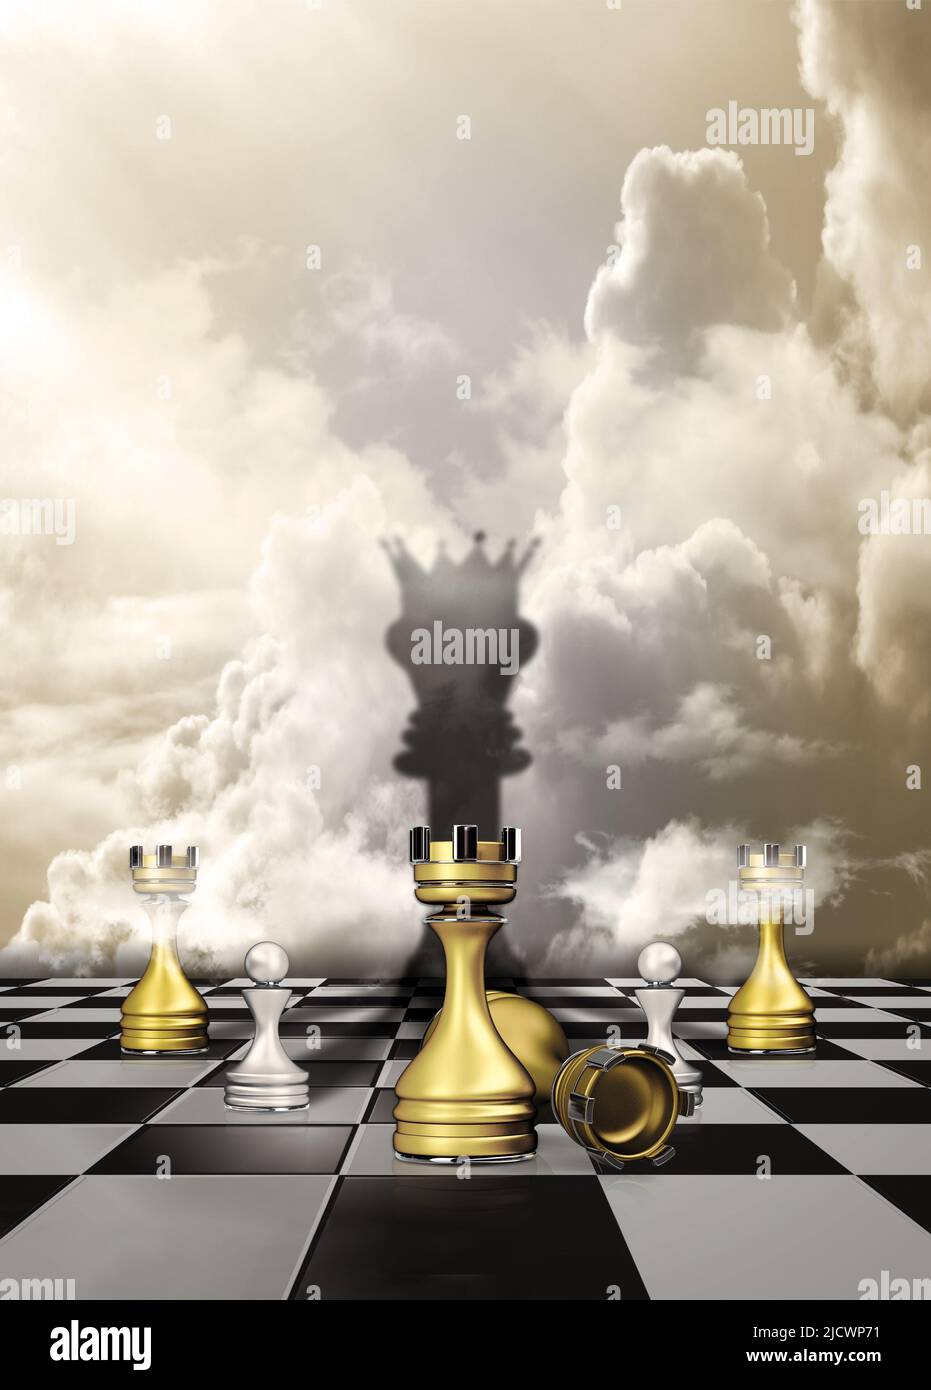 3D illustration. Overturned chess pieces and board. Crown of a king. Stock Photo